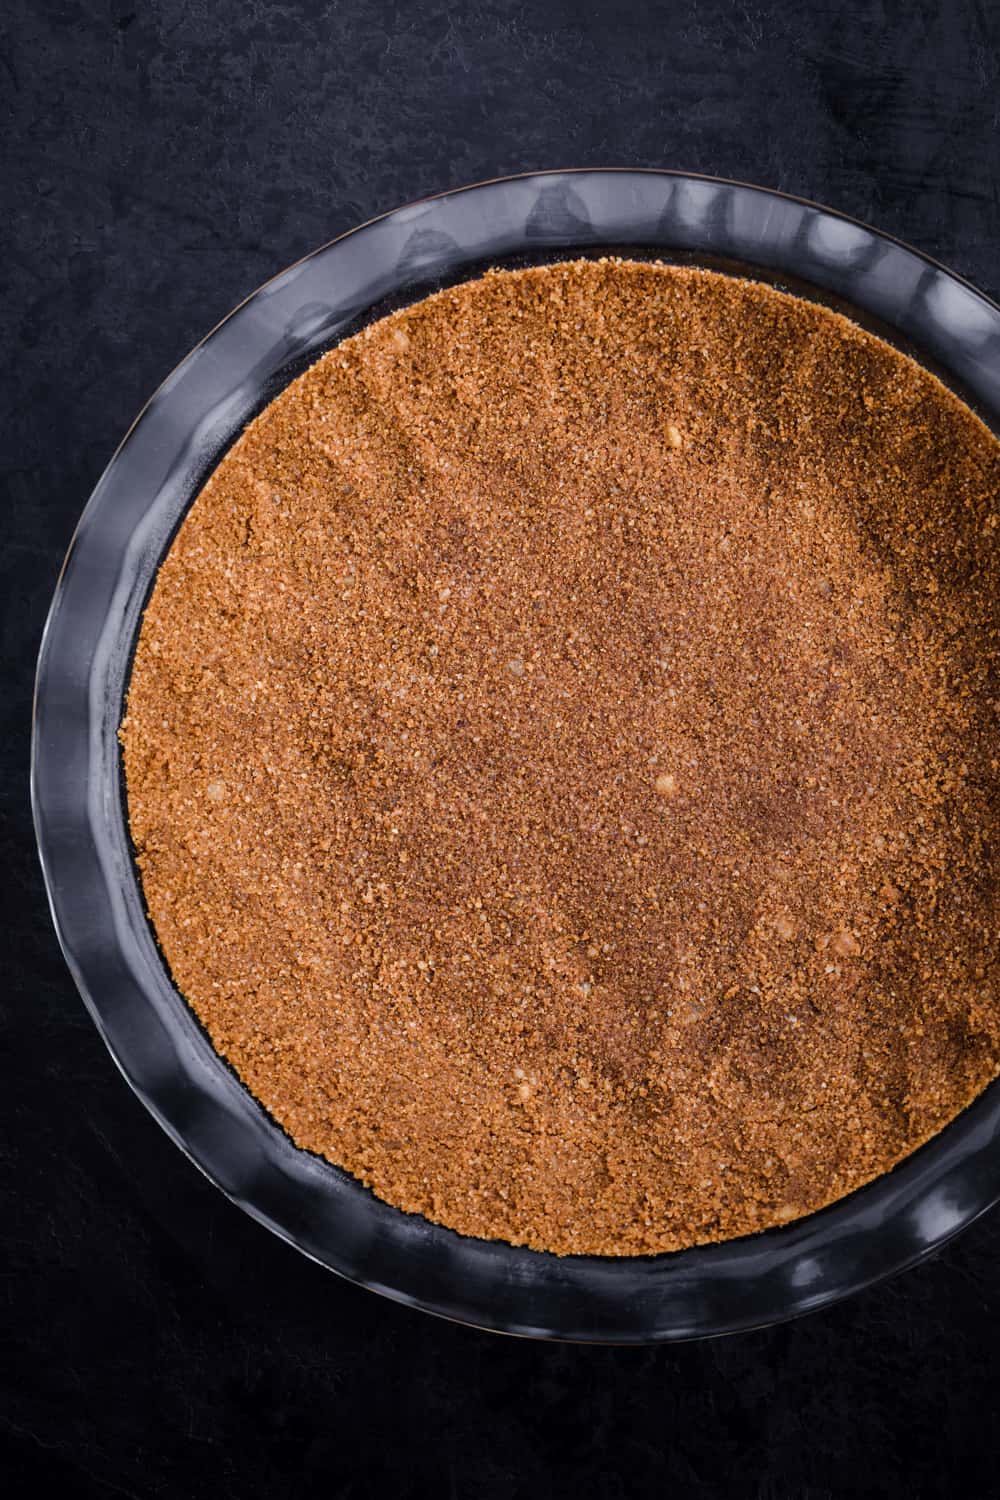 Gingersnap crust patted into a pie plate, all ready to be baked, overhead shot on a black background.